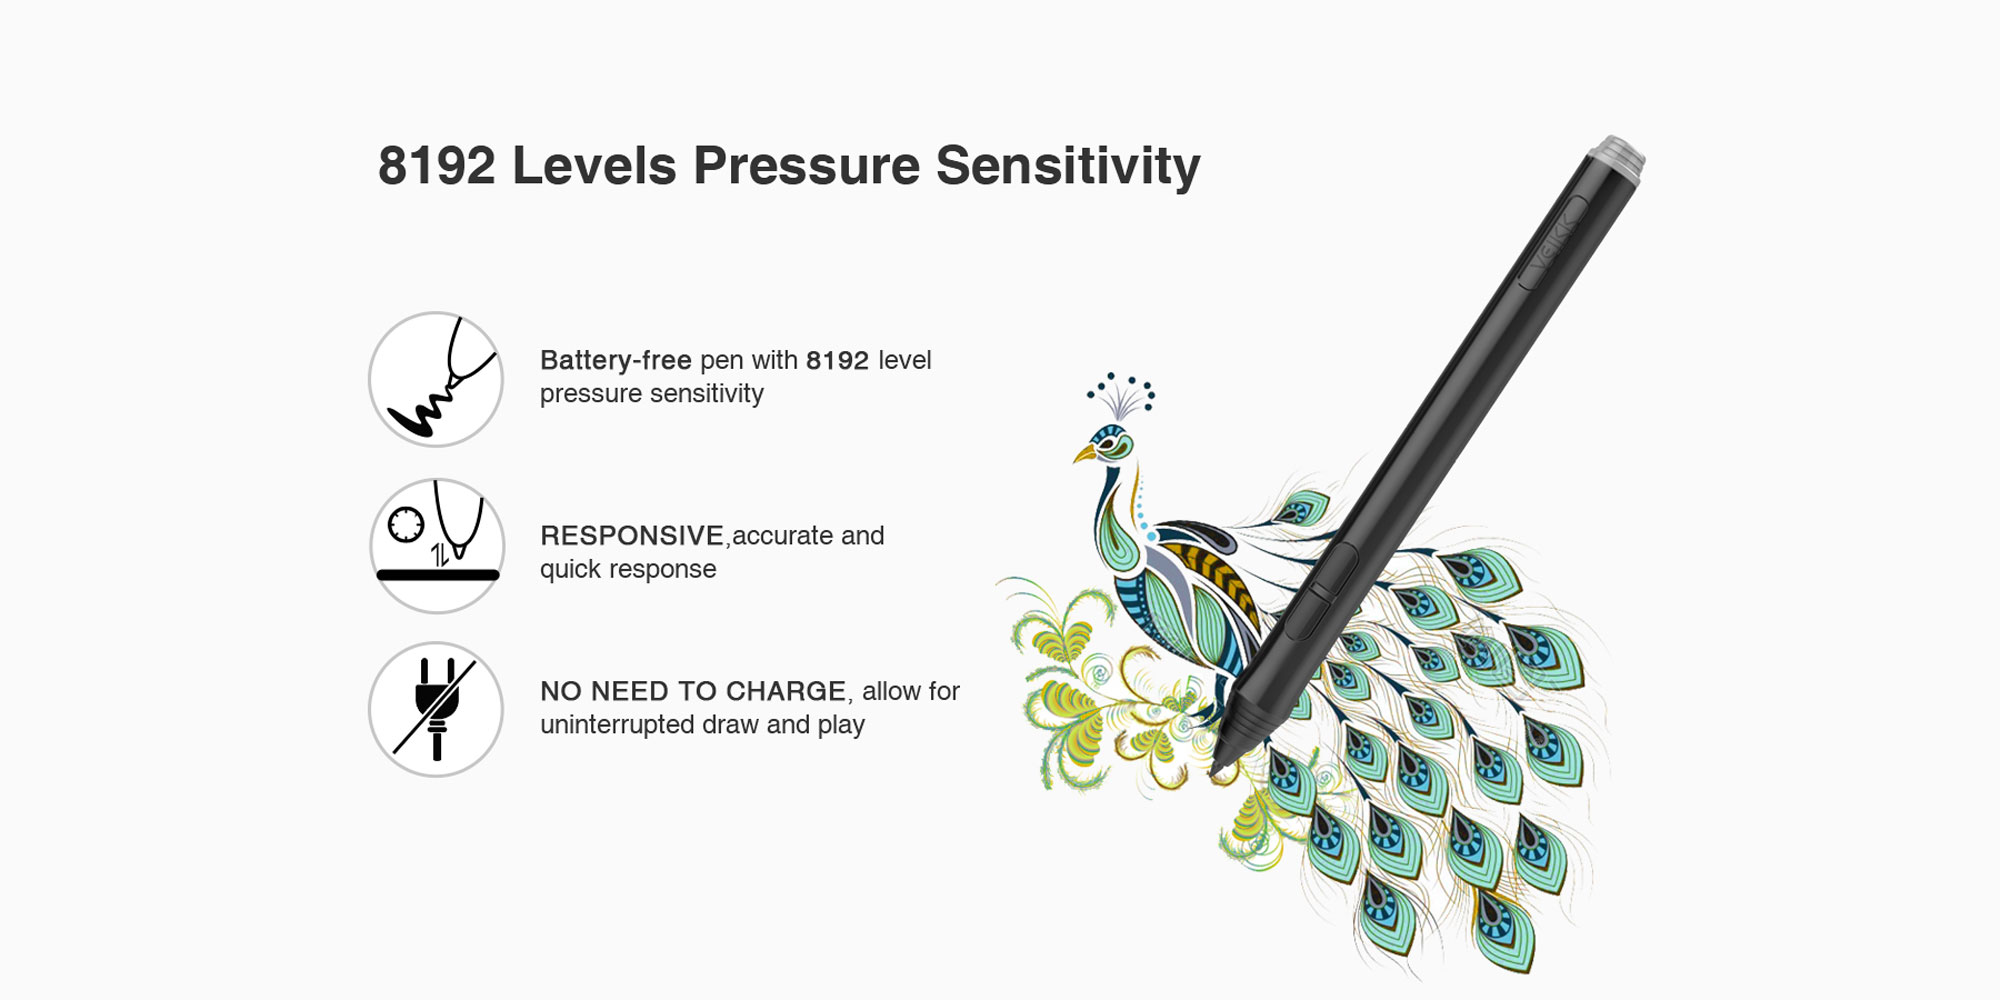 Graphic showing the features of the Veikk passive pen